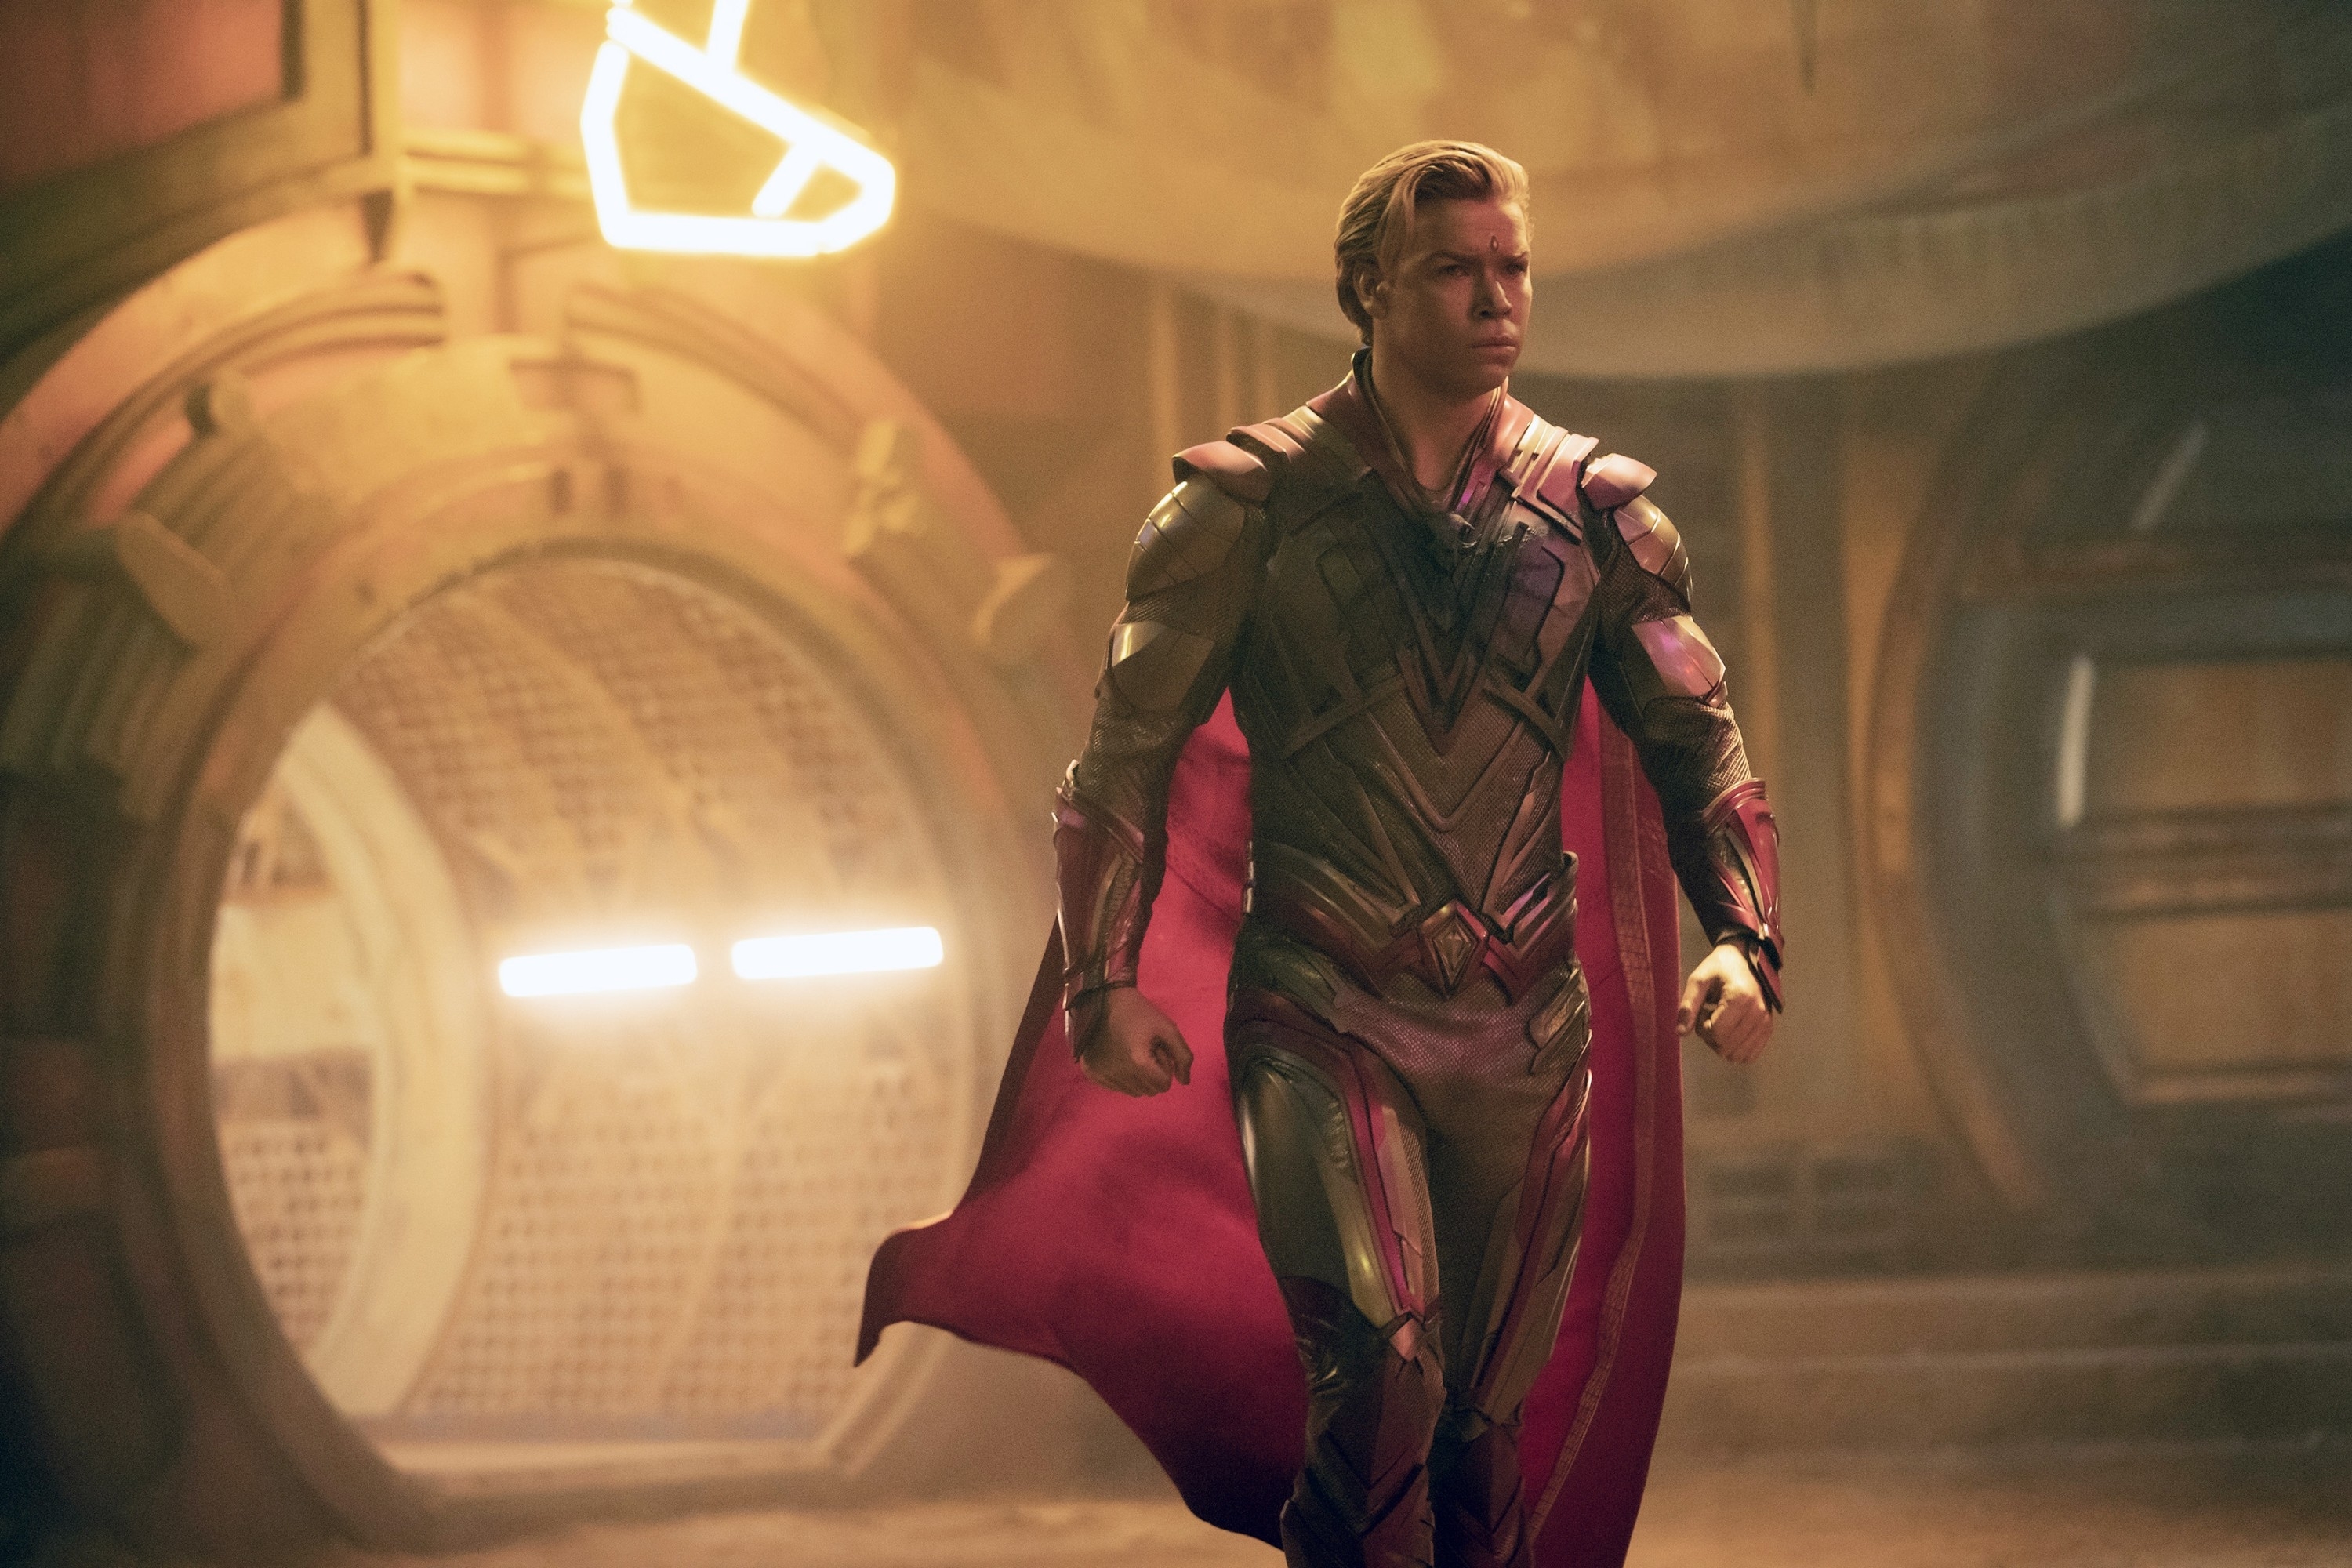 in a scene, Will as Adam Warlock in a superhero suit with a cape, standing confidently in a corridor